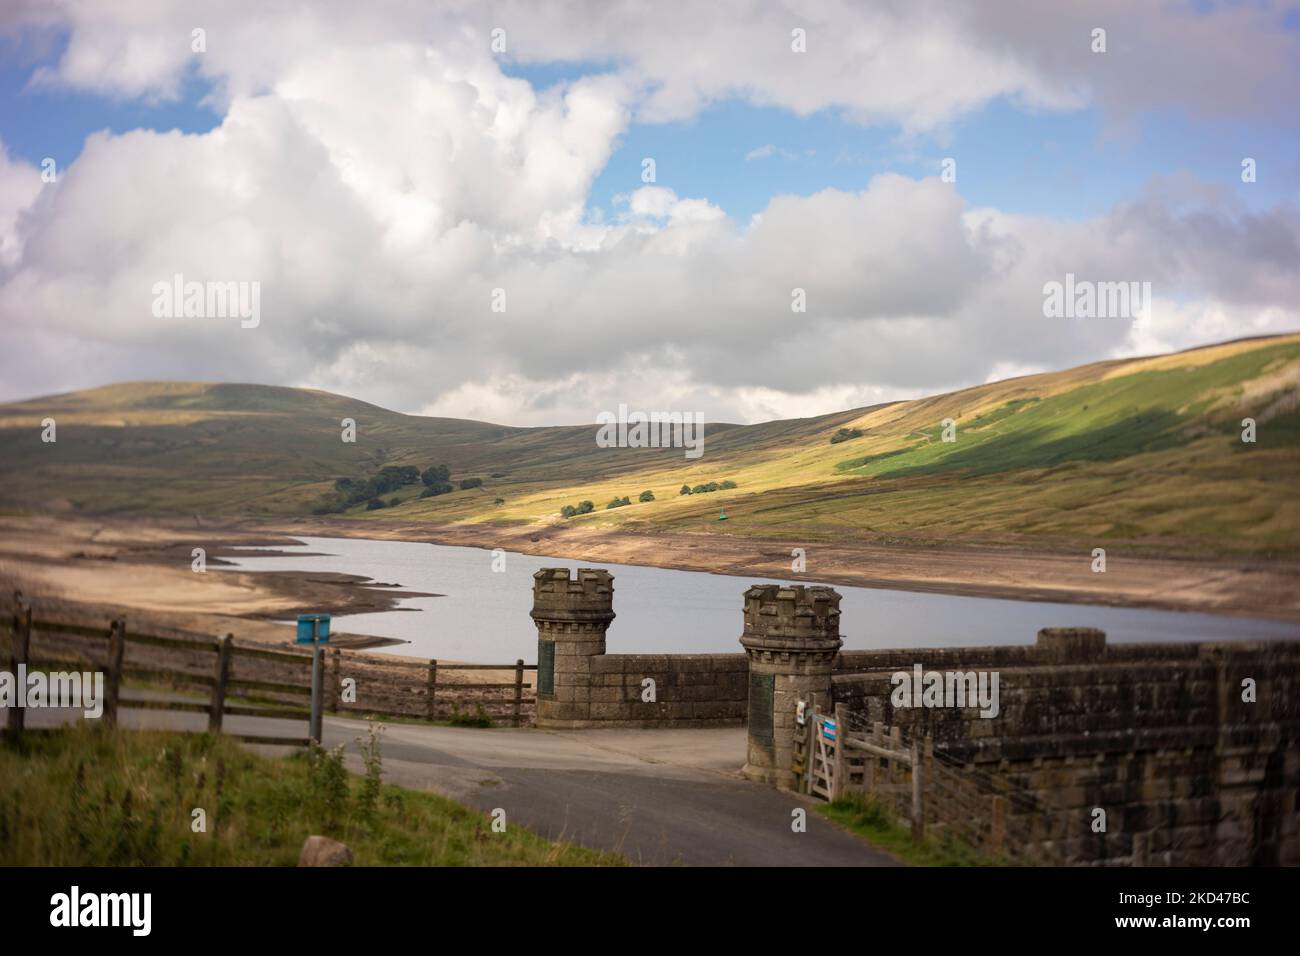 Scar House Reservoir during severe summer drought Stock Photo